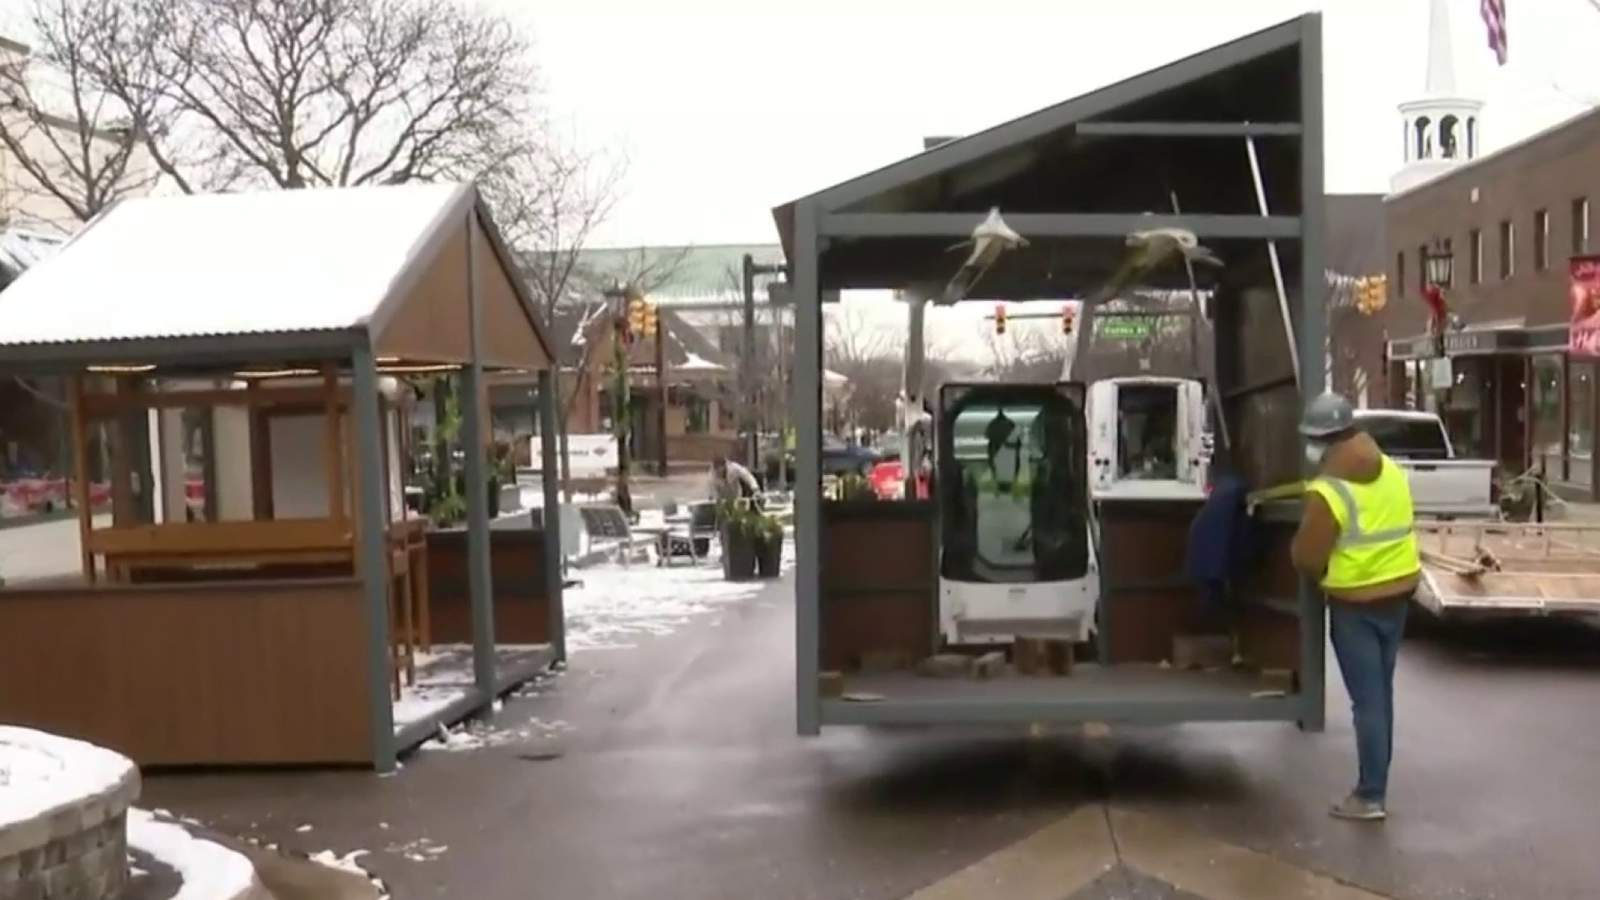 Heated outdoor ‘pods’ installed to keep downtown Northville businesses going